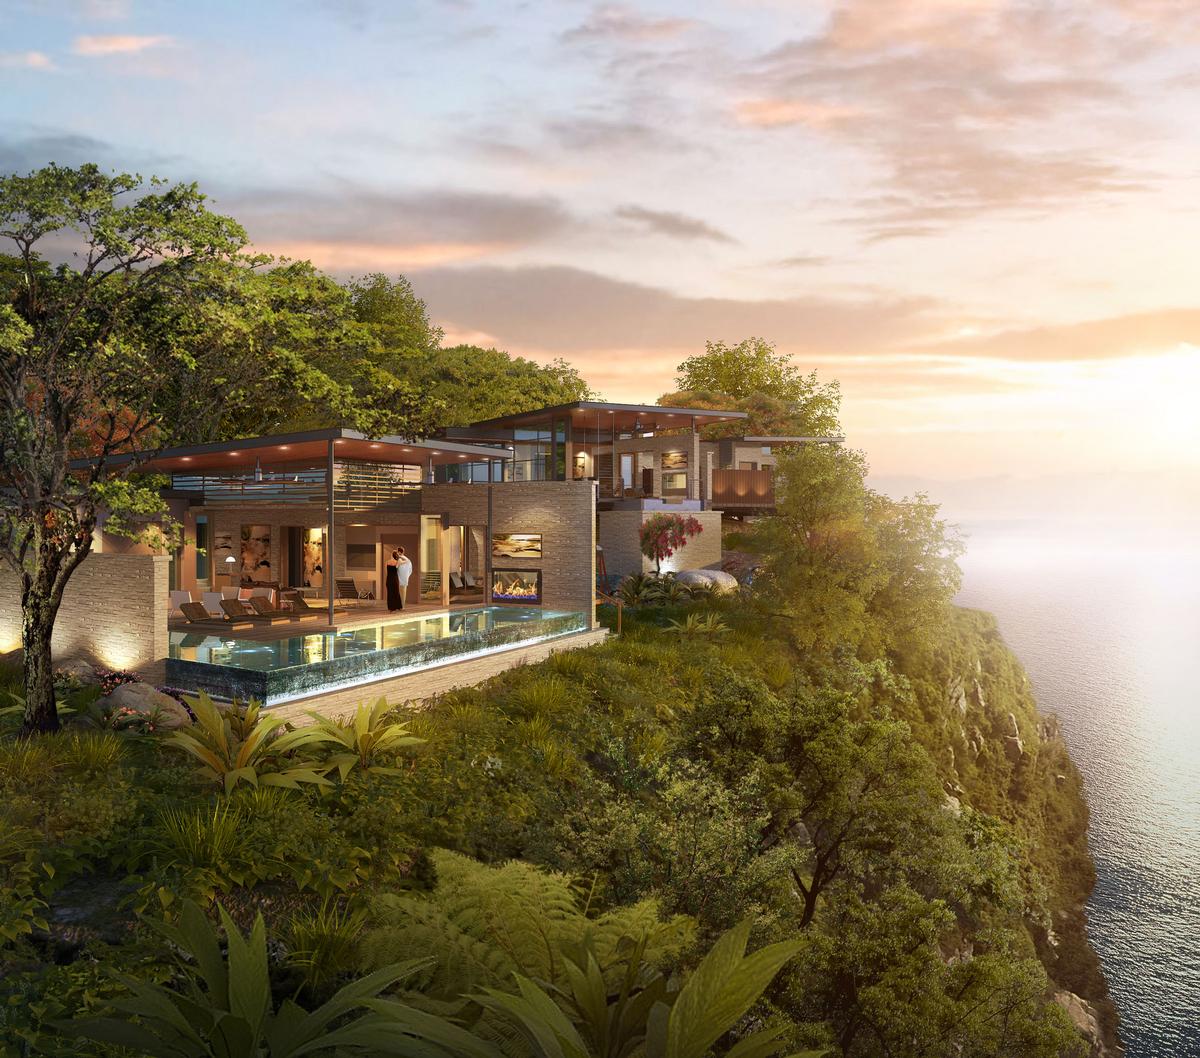 Situated within a forested setting, the resort will have 130 bedrooms and 50 residences designed by Dallas-based architects HKS